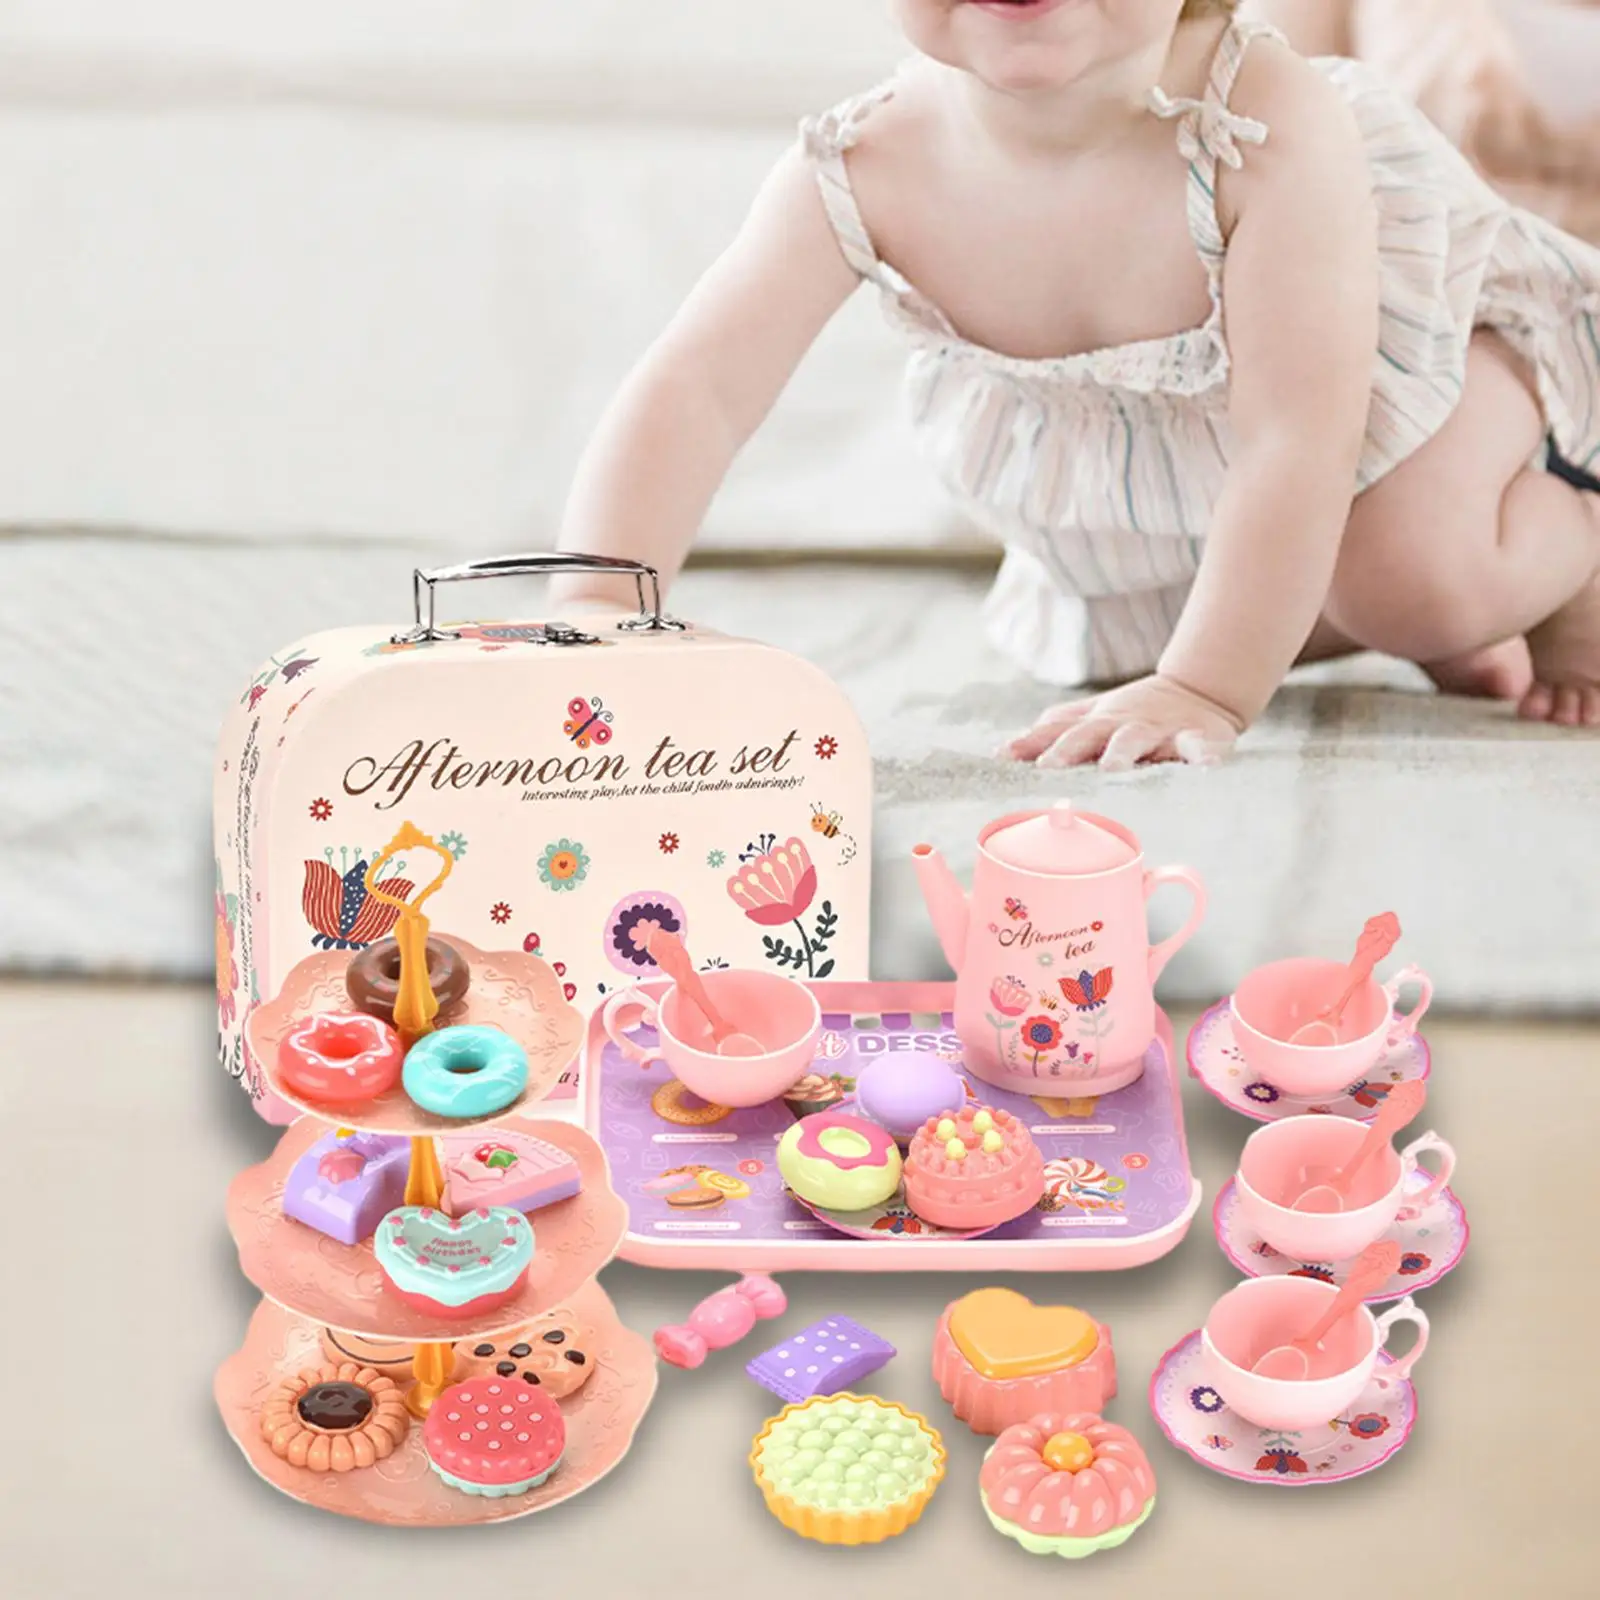 Tea Set for Little Girls Montessori House Accessories Dessert Teapot Dishes Playset for Age 3 4 5 6 Year Old Preschool